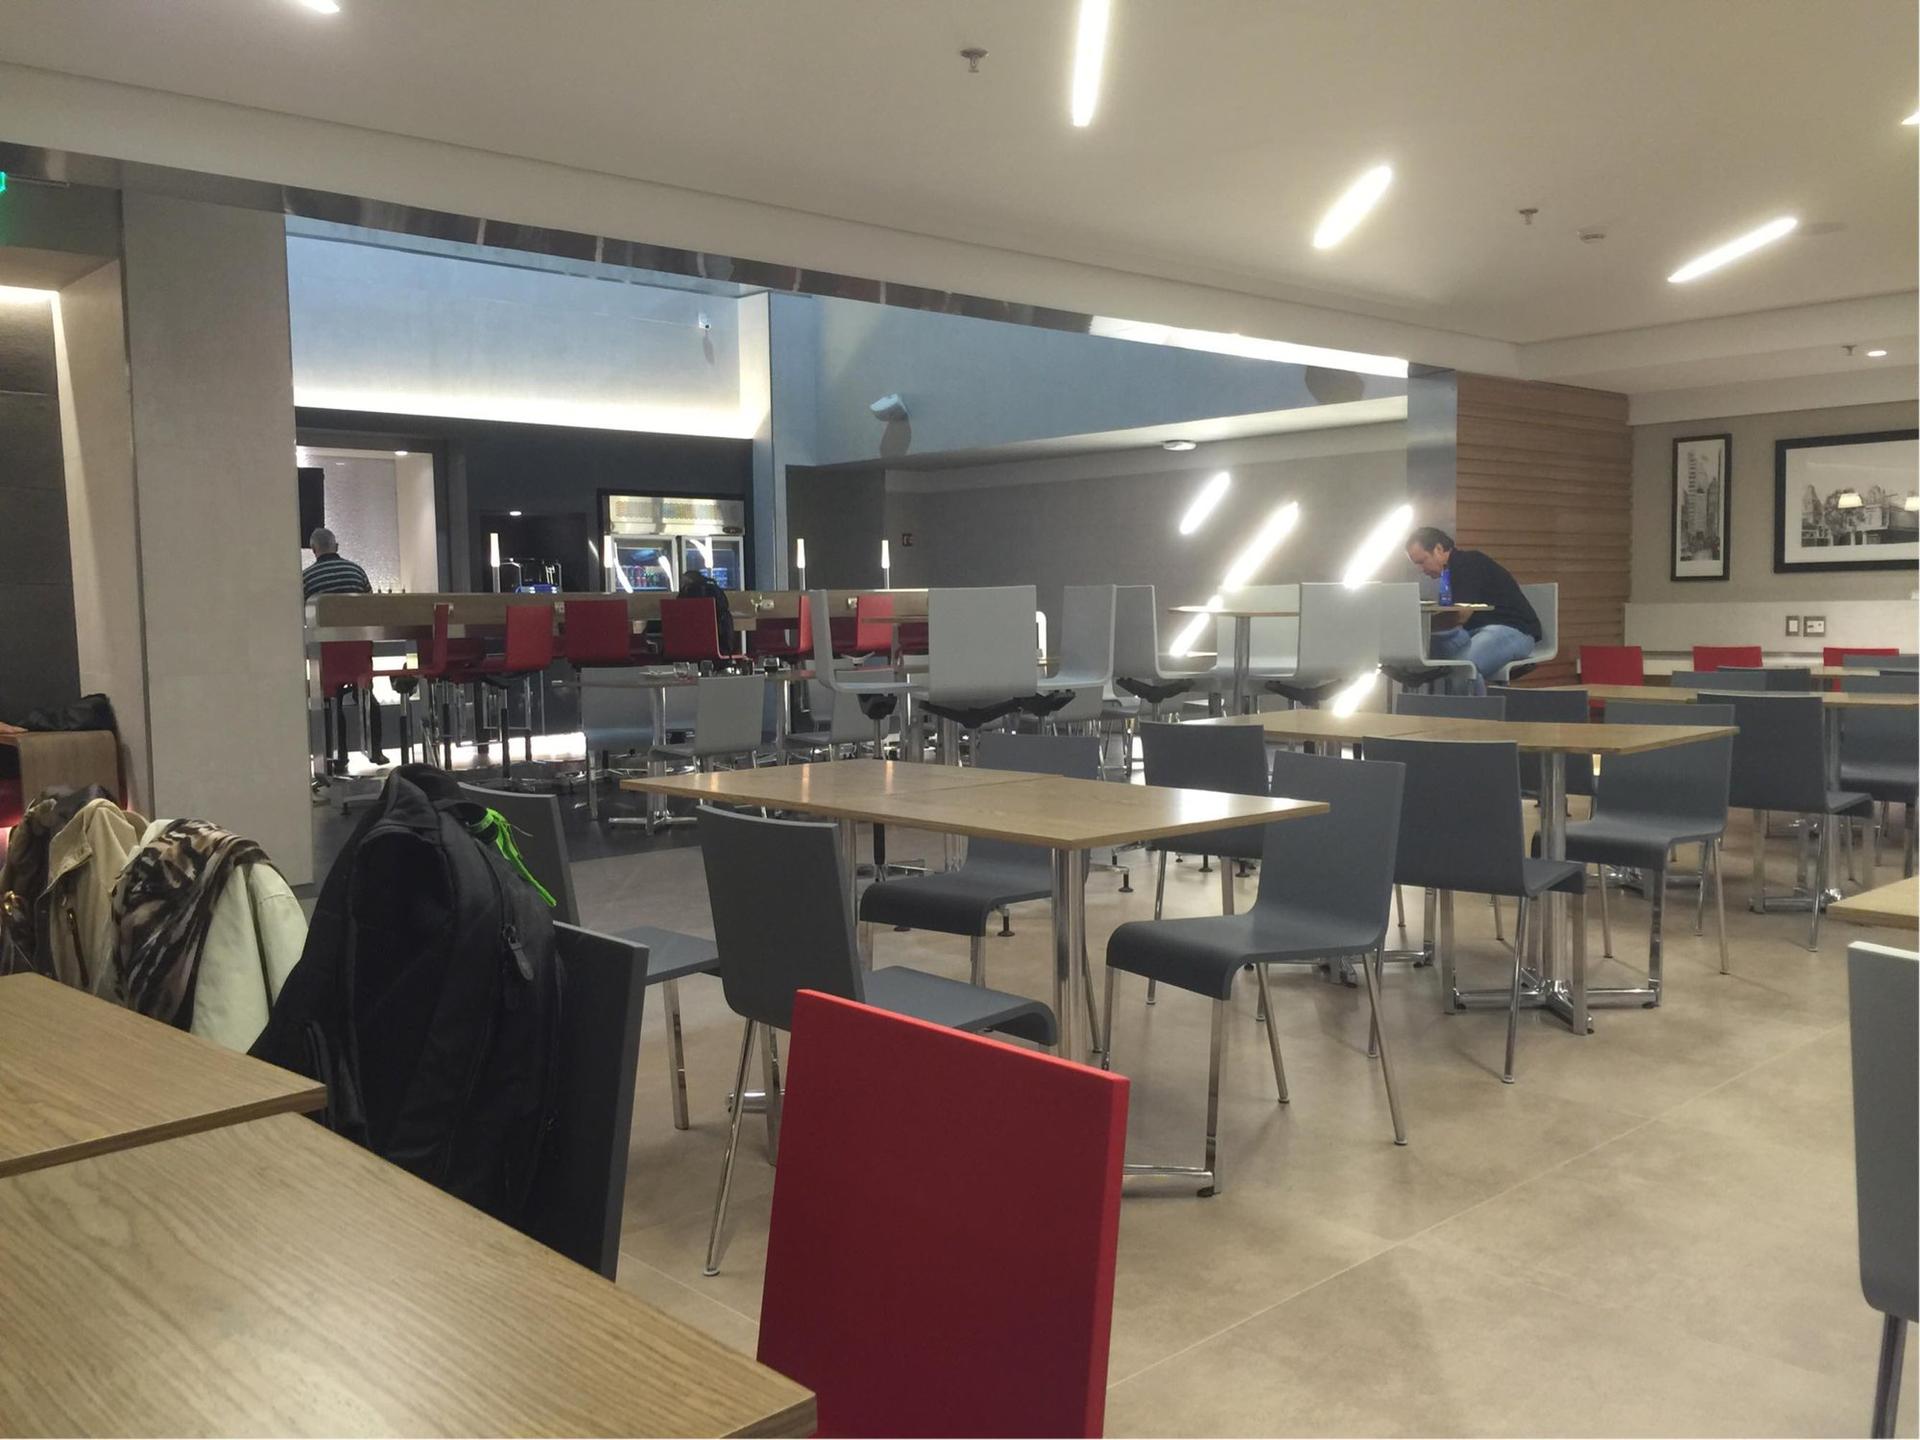 American Airlines Admirals Club image 16 of 30